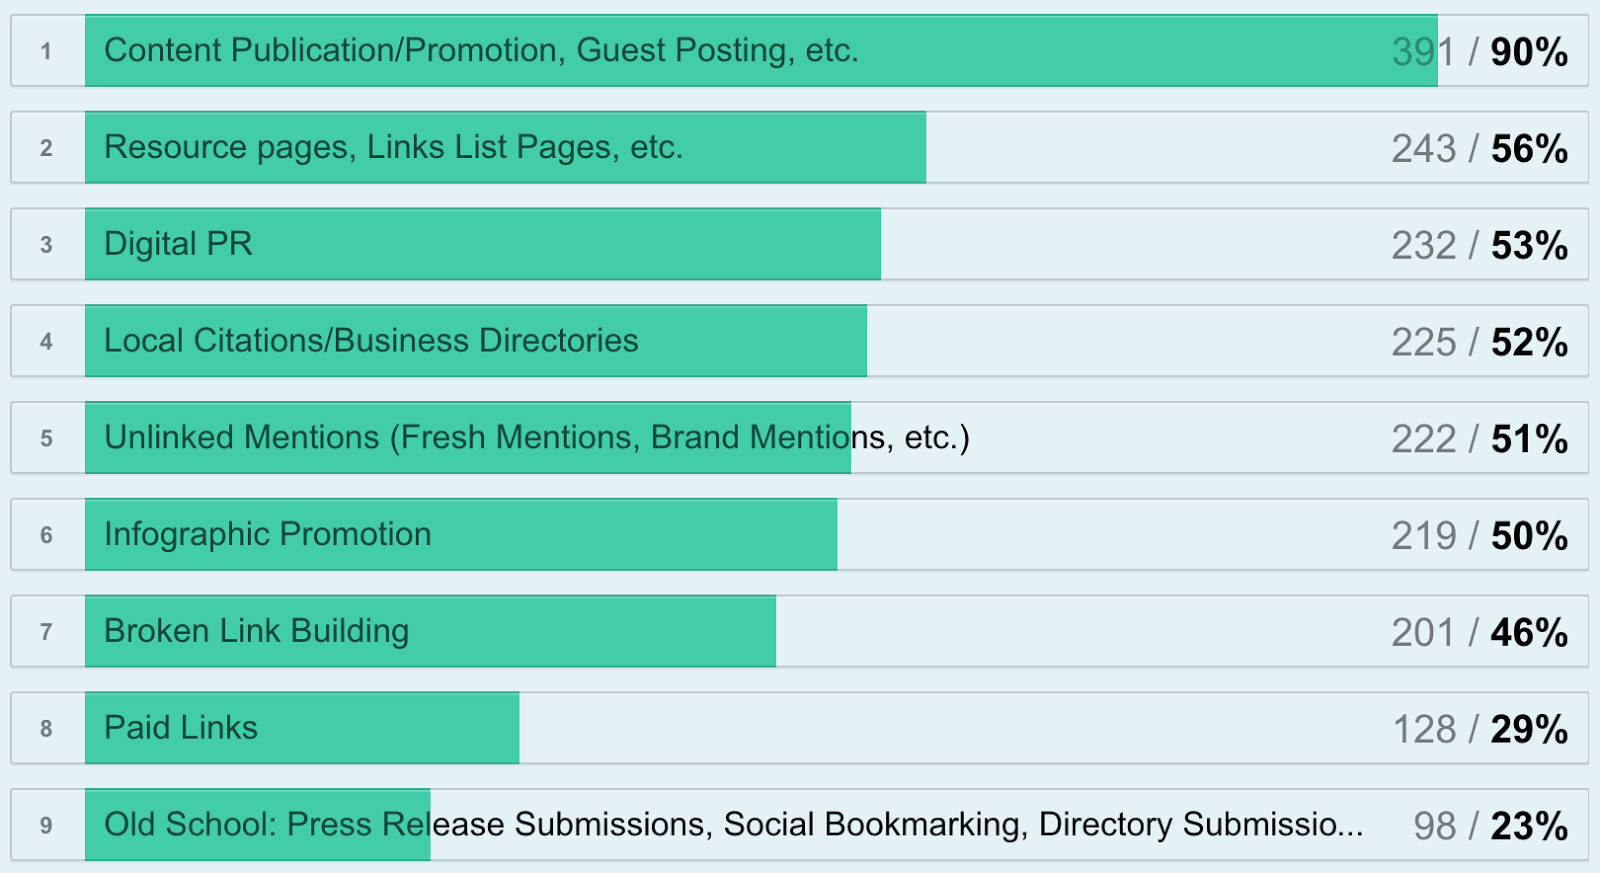 Moz 2016 survey showing resource page link building as the second most popular link building tactic